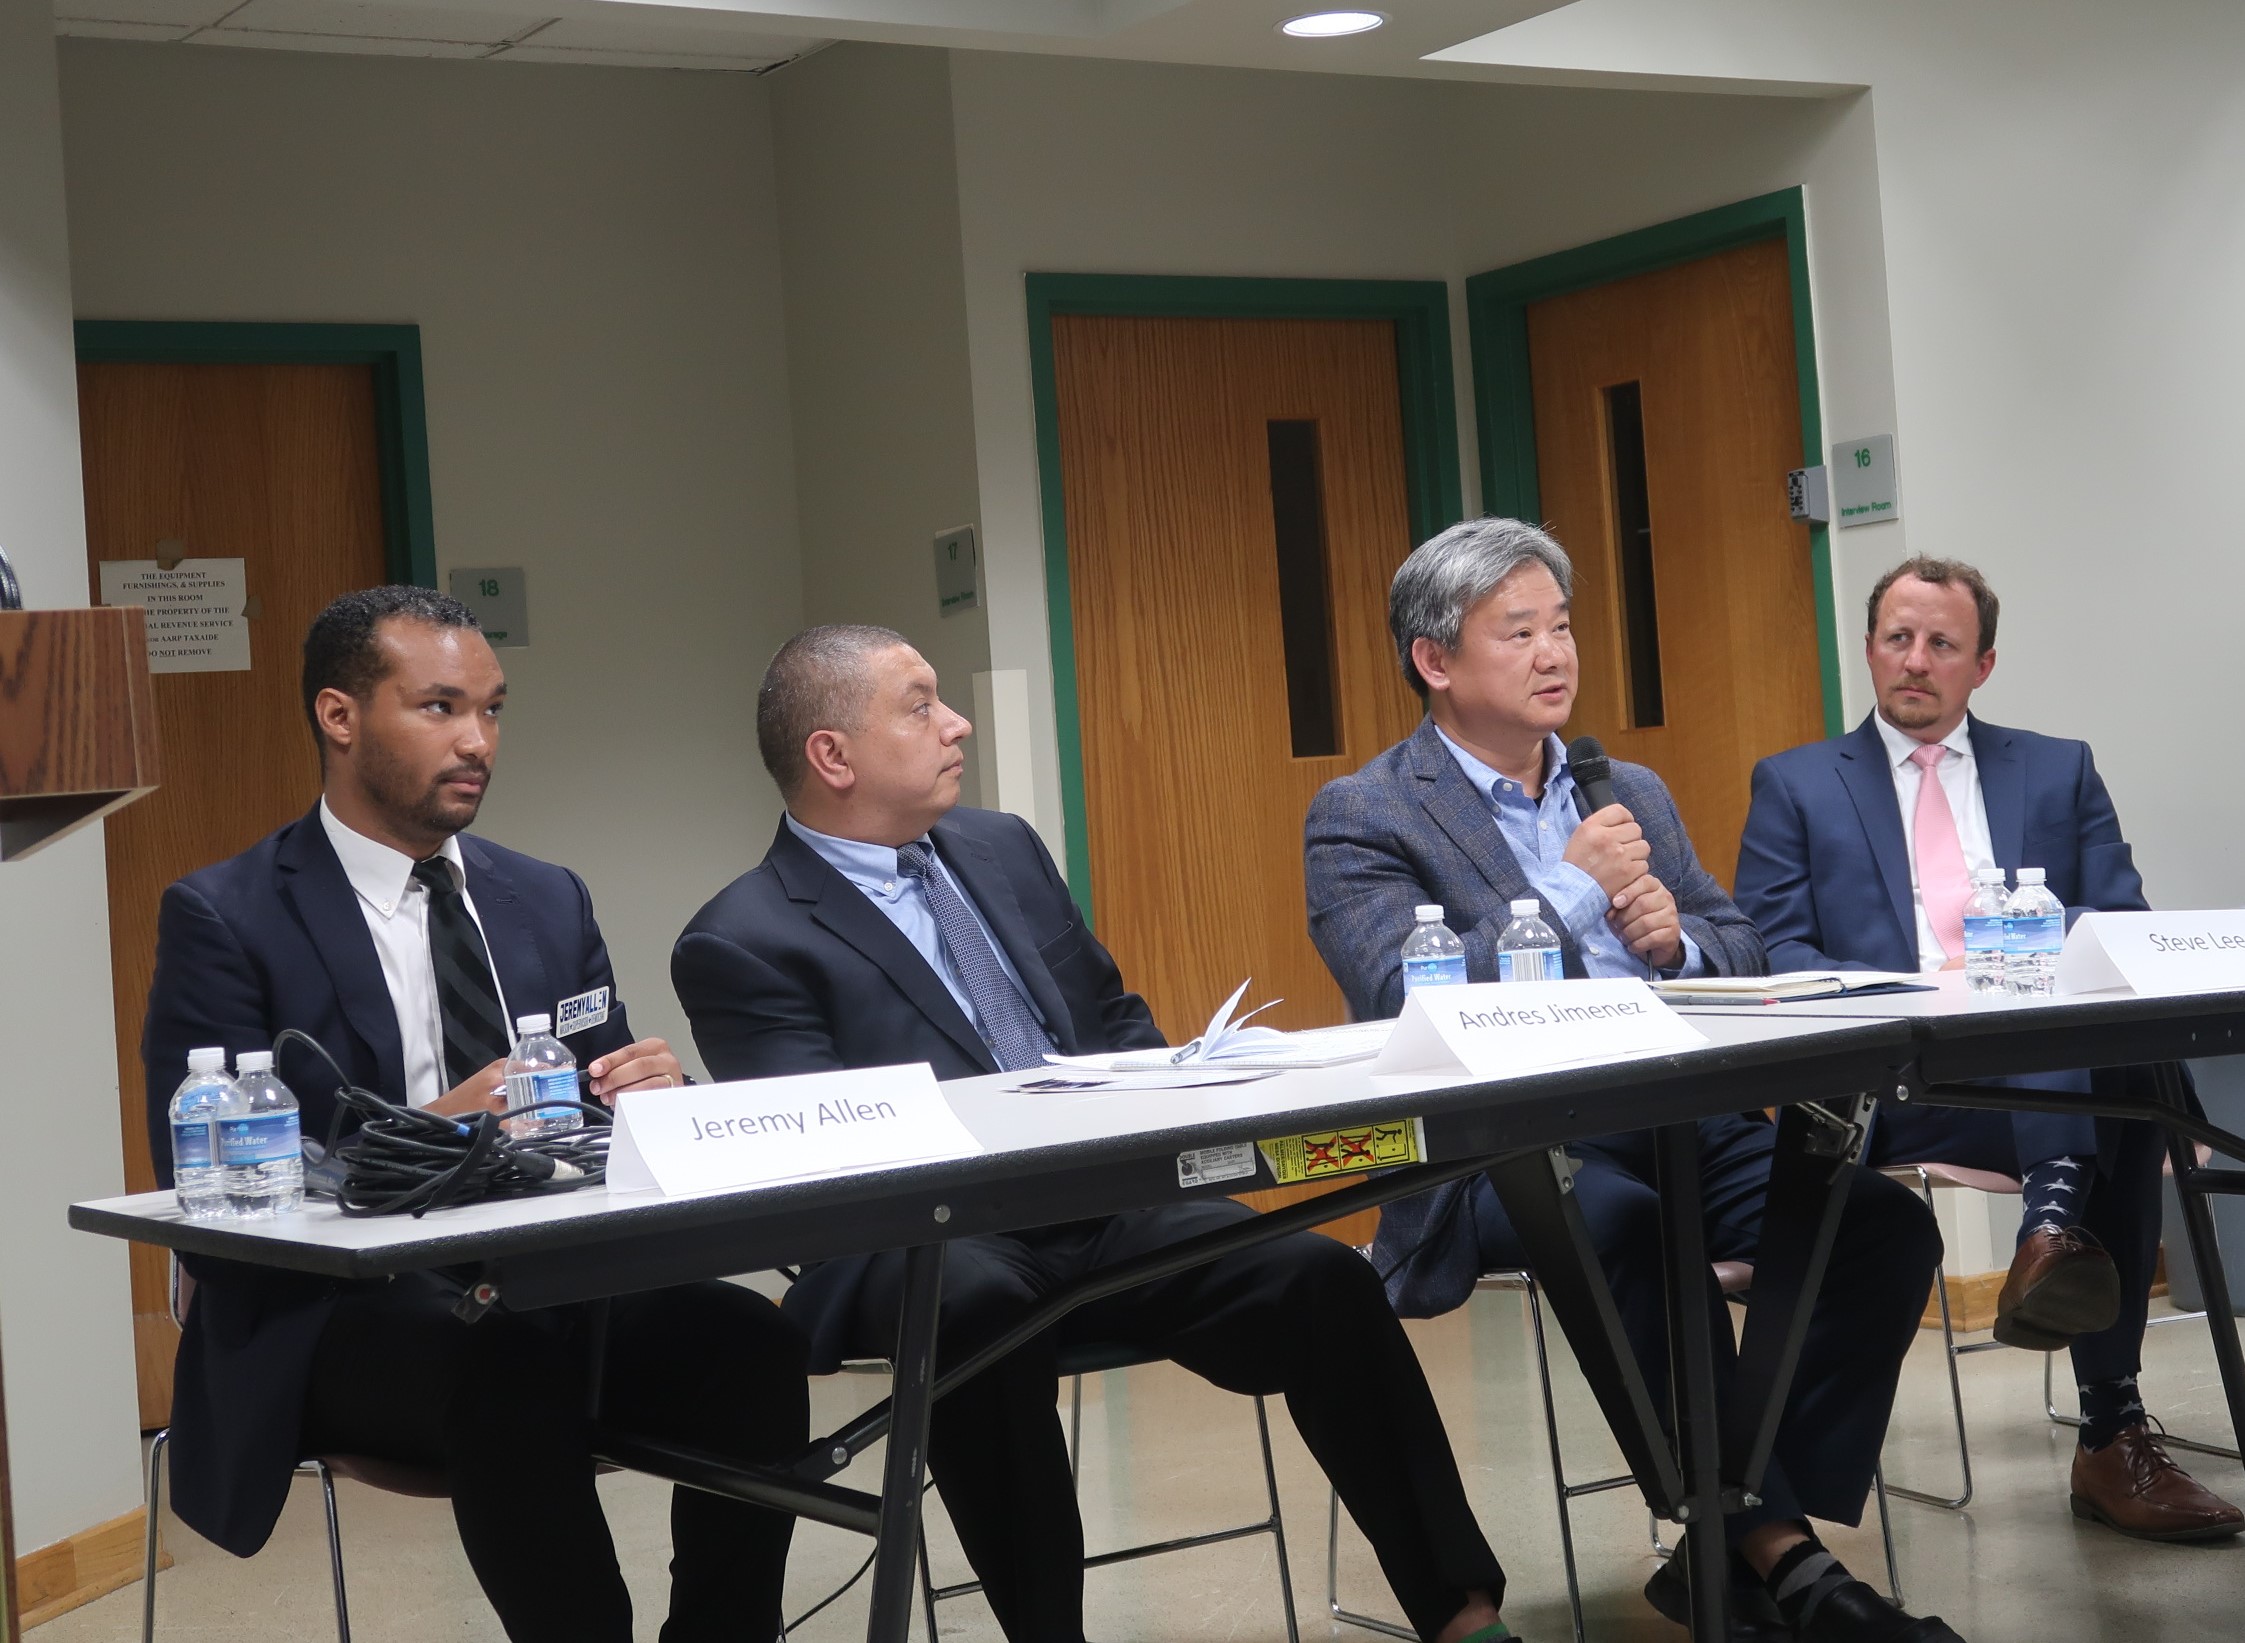 Mason District supervisor candidates outline their priorities and